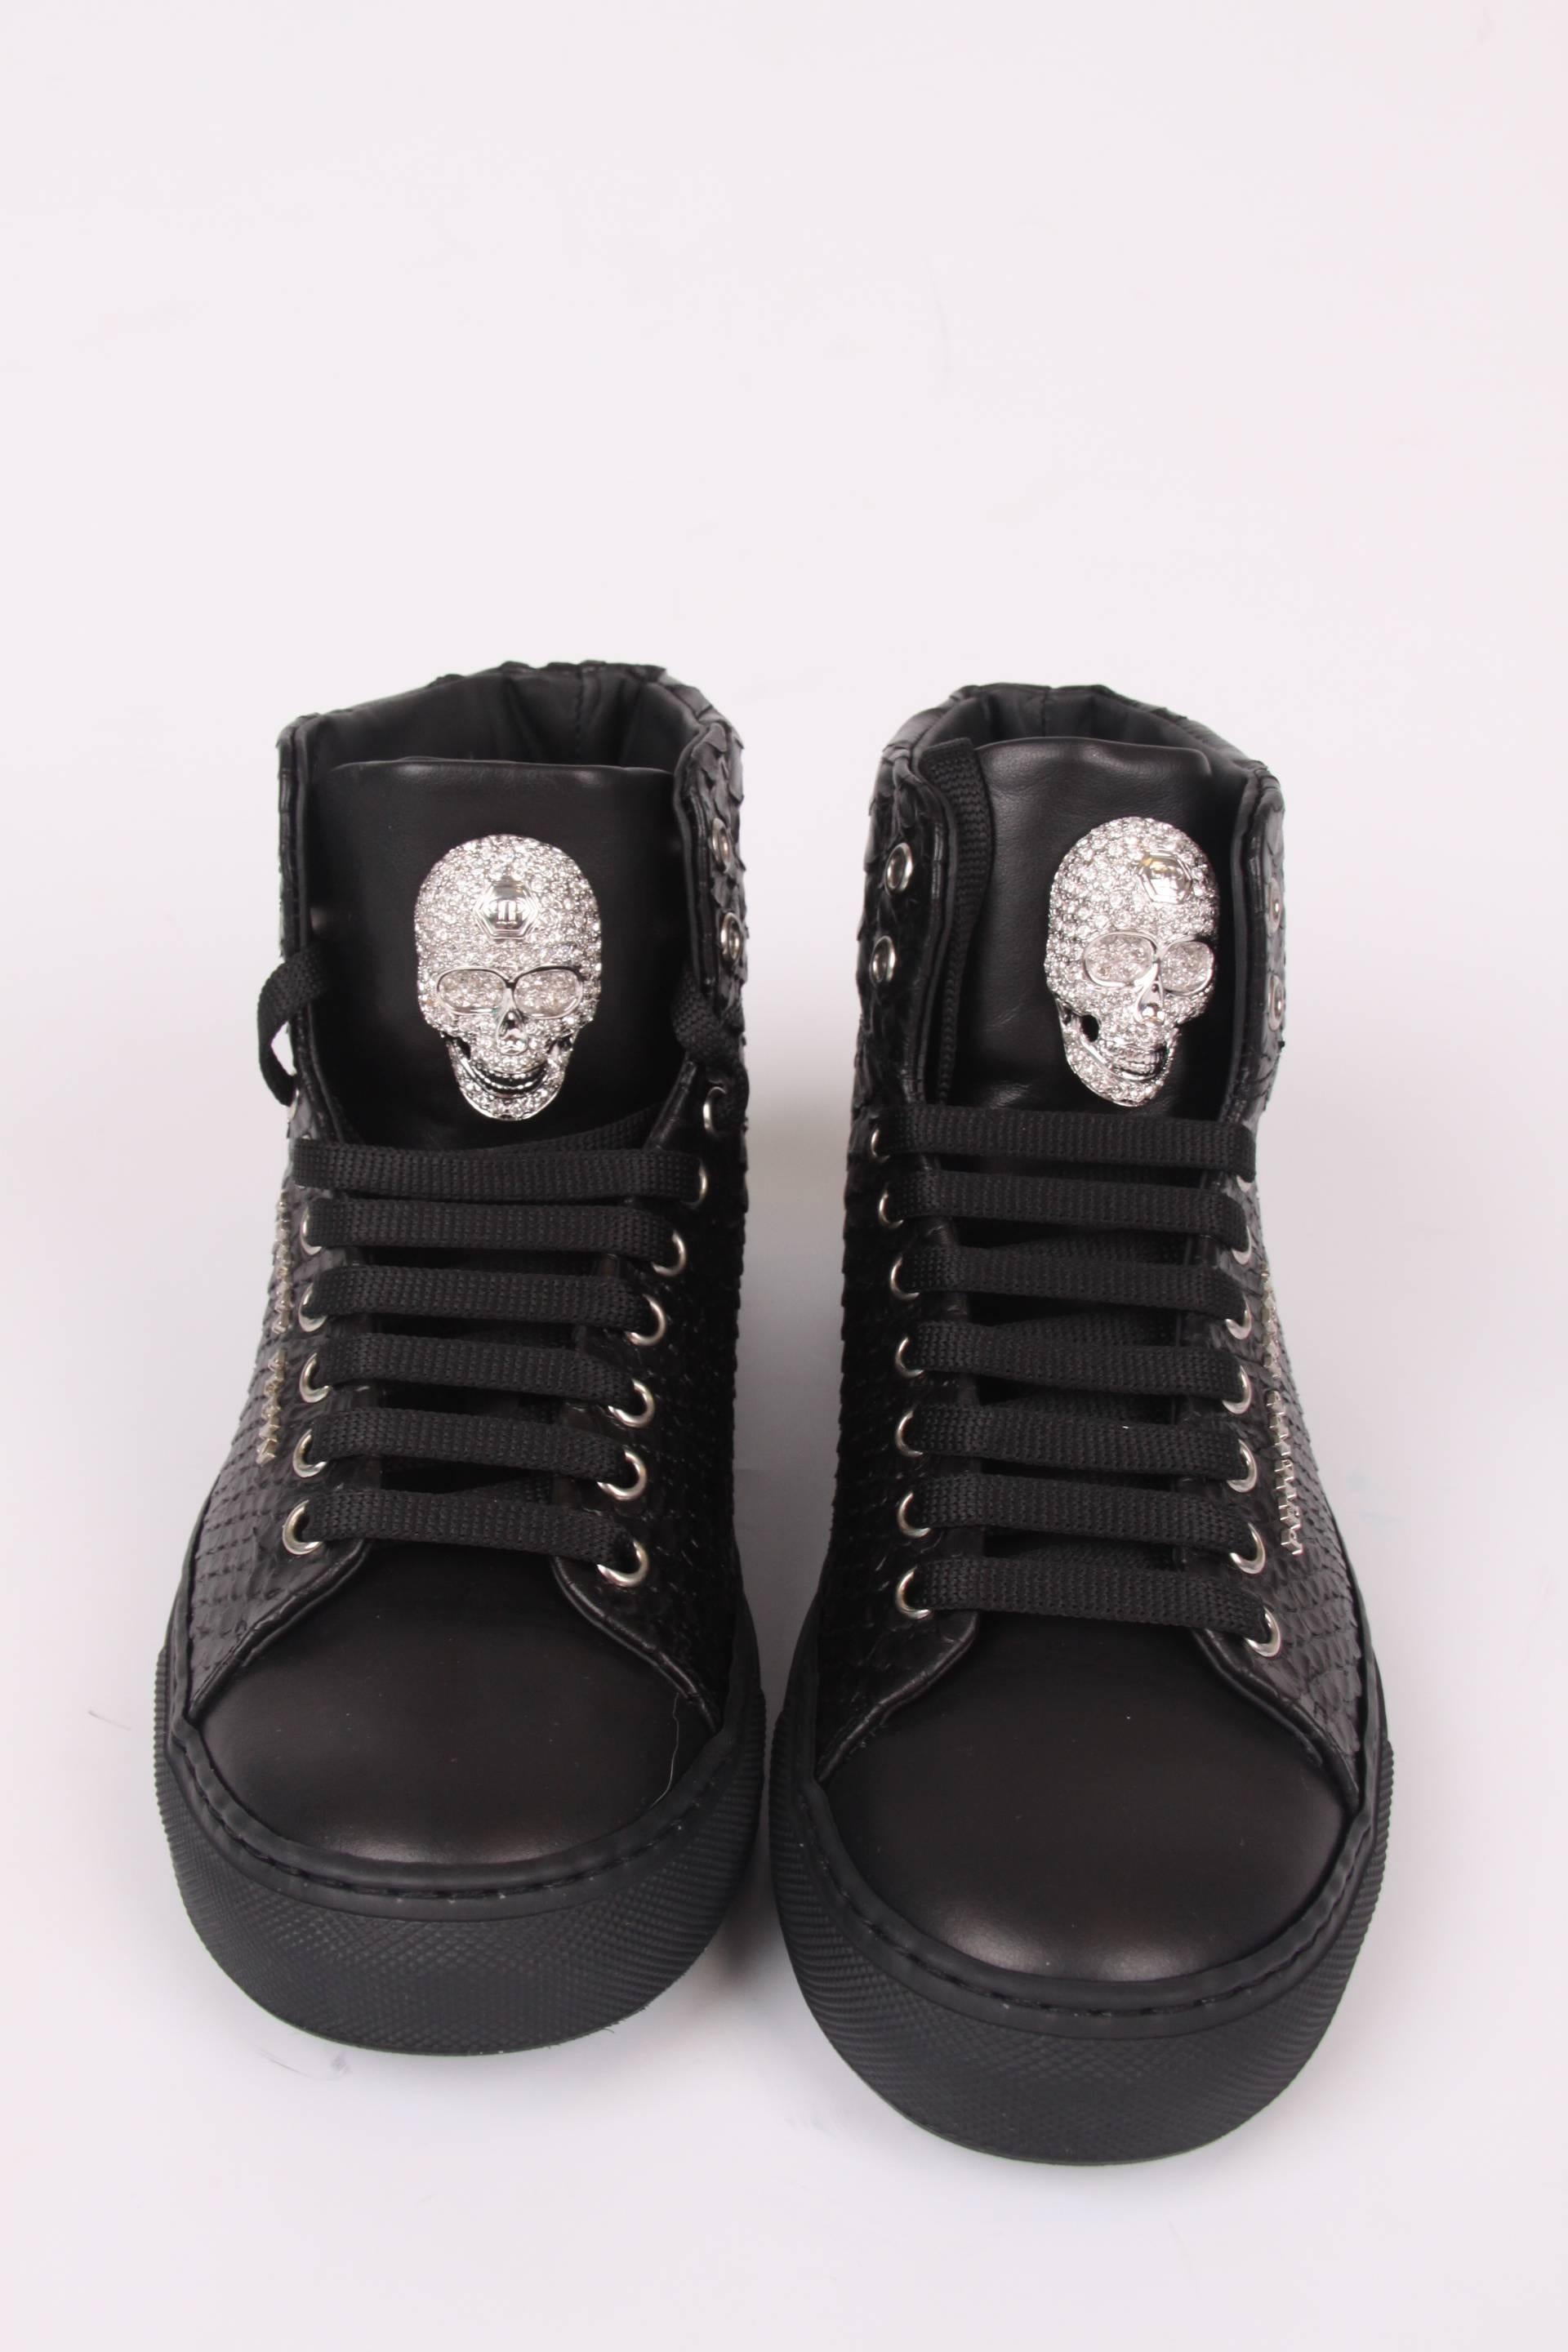 Mid-top sneakers by Philipp Plein with a skull at the front.

Crafted in black leather, the sides have been decorated with a python-look. The toe and tongue are made of smooth leather. On top of the tongue you will find the silver skull, which is